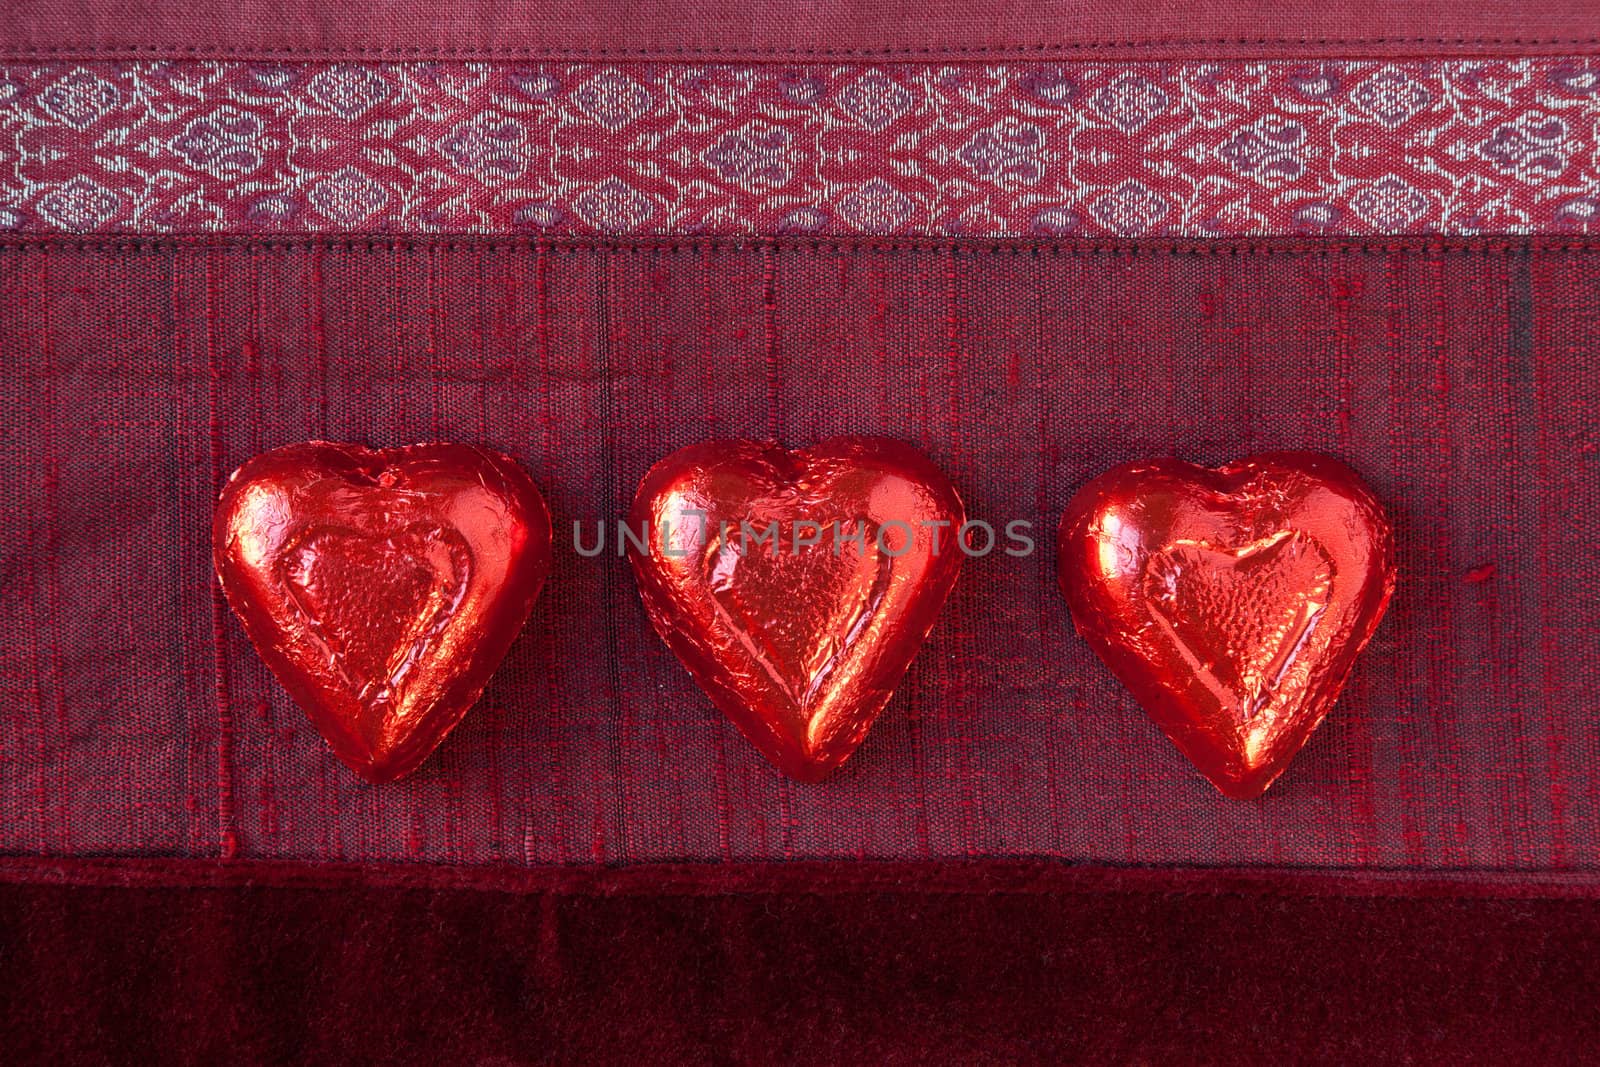 Three red foil wrapped candy hearts in a row on red textured background.